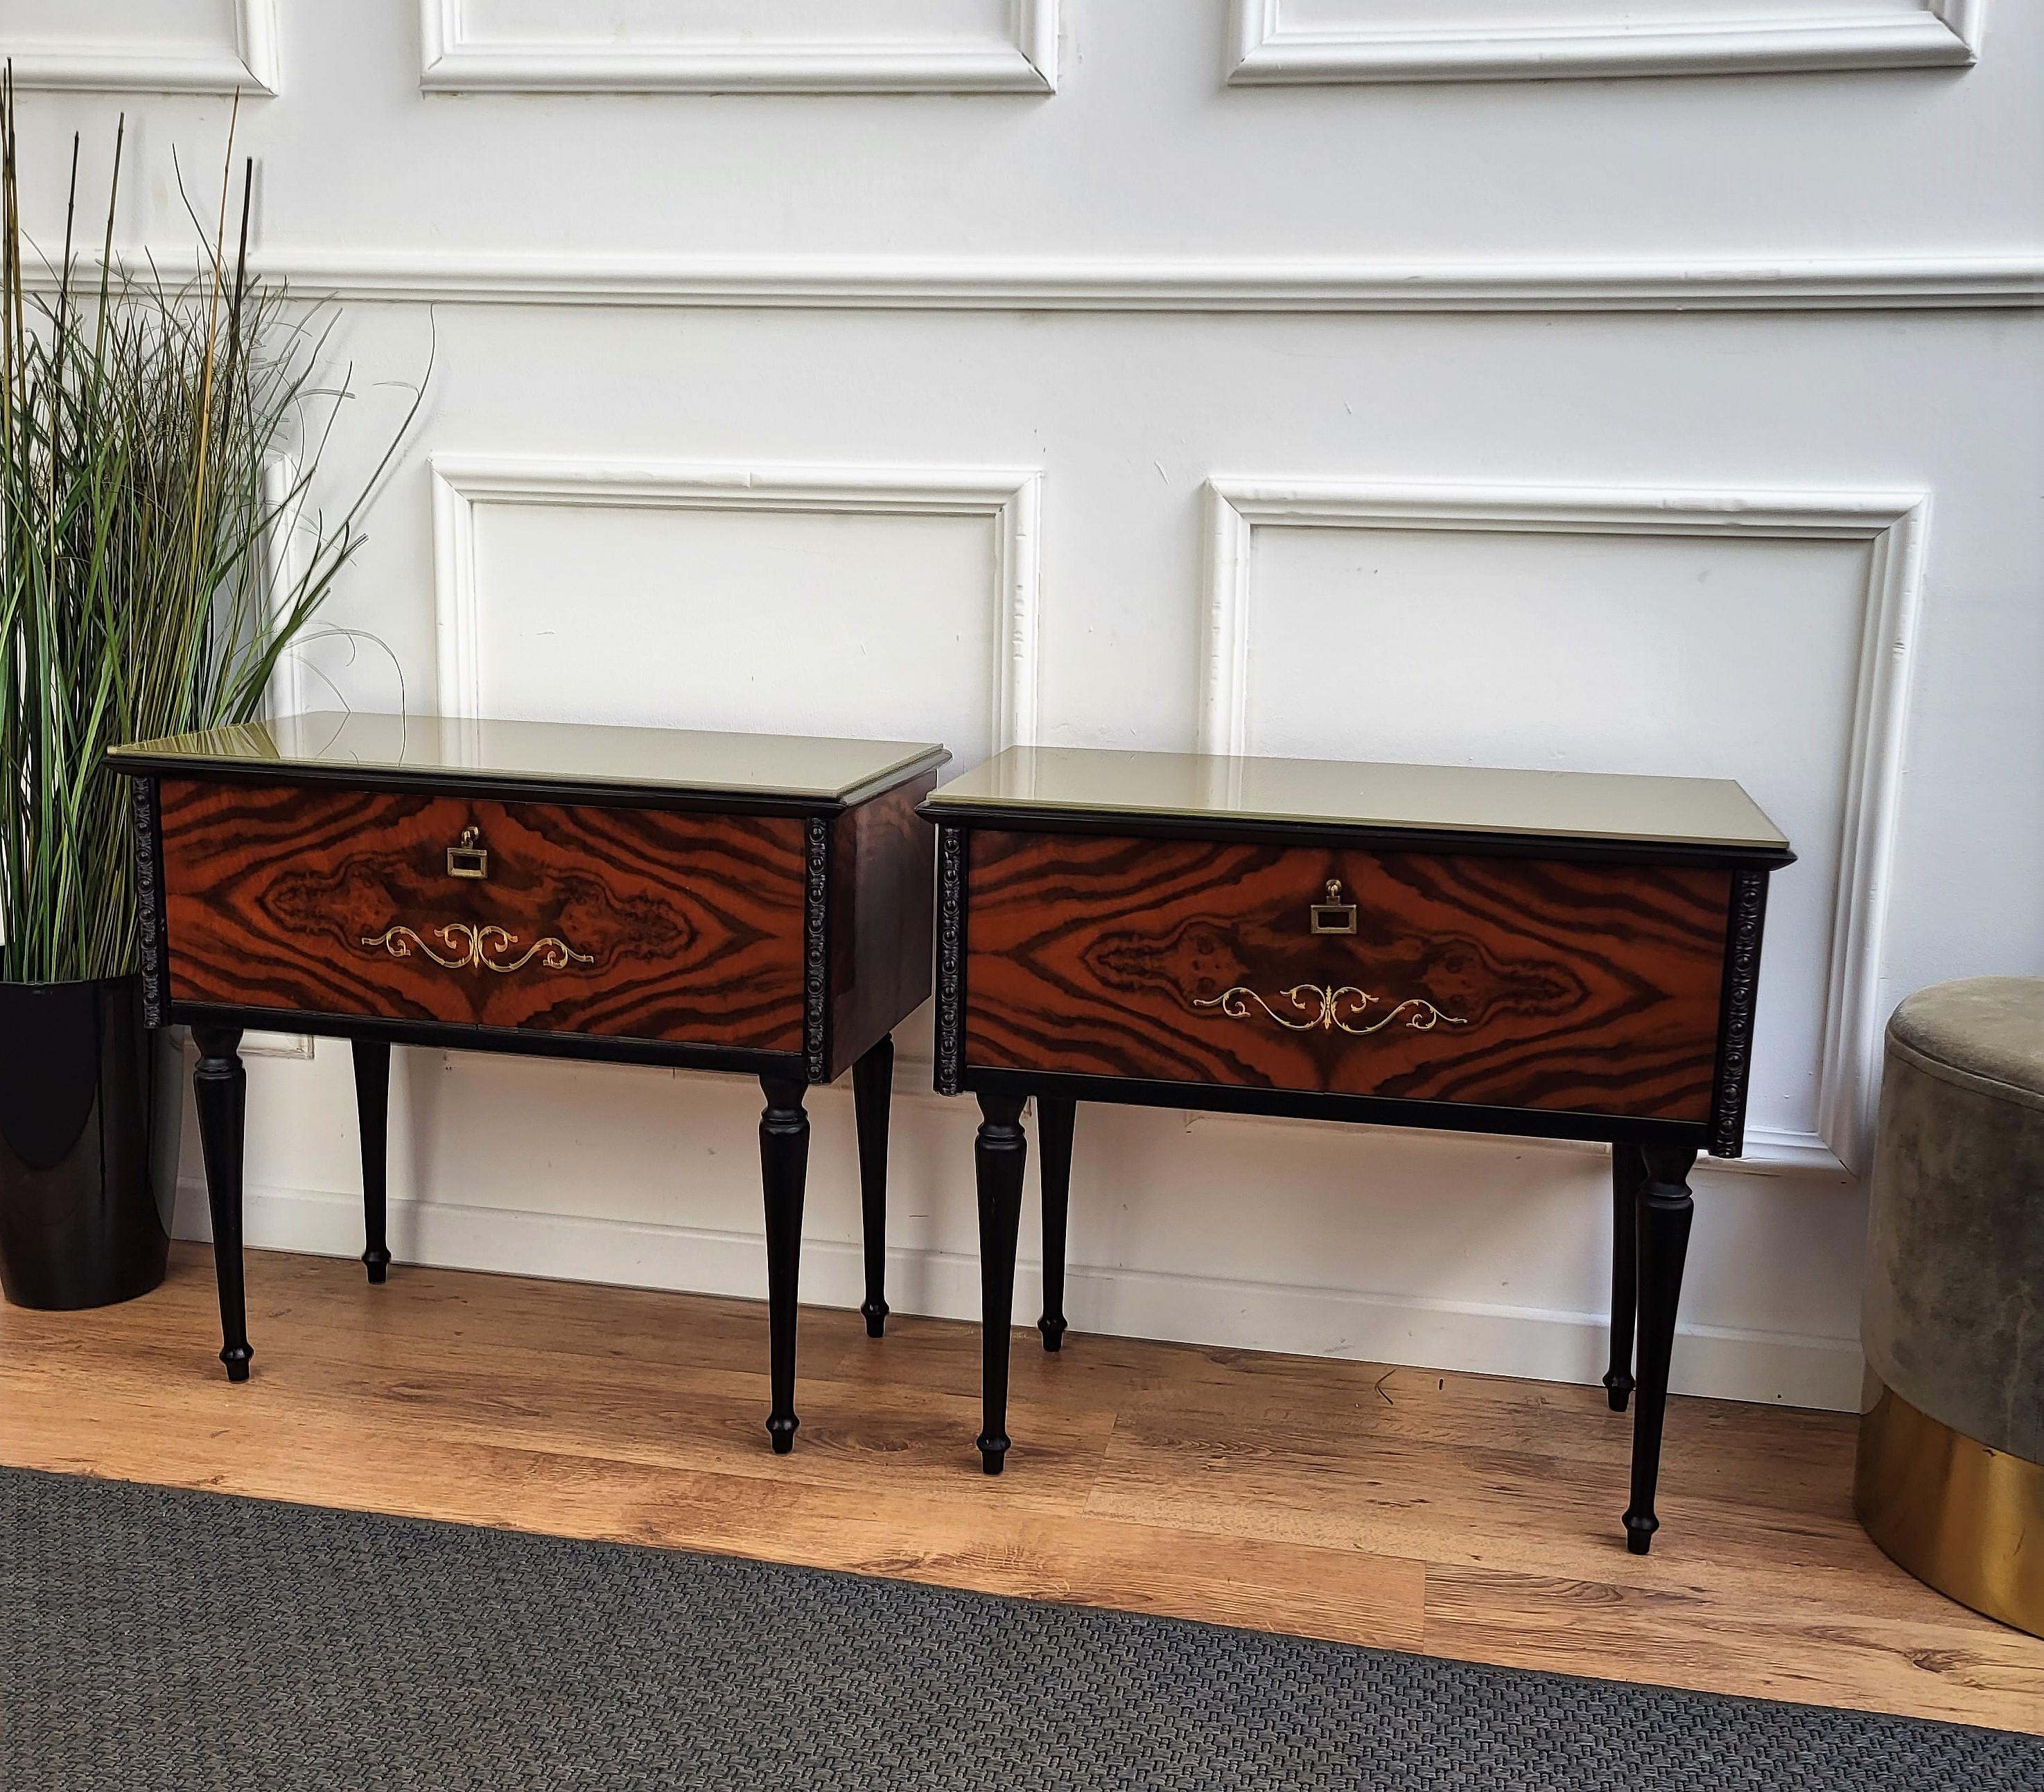 Very elegant and refined Italian 1950s neoclassical pair of bedside tables with front flip opening and great pattern design of the walnut veneer wood and lacquered glass top. Great details such as the brass handles make those nightstands a great